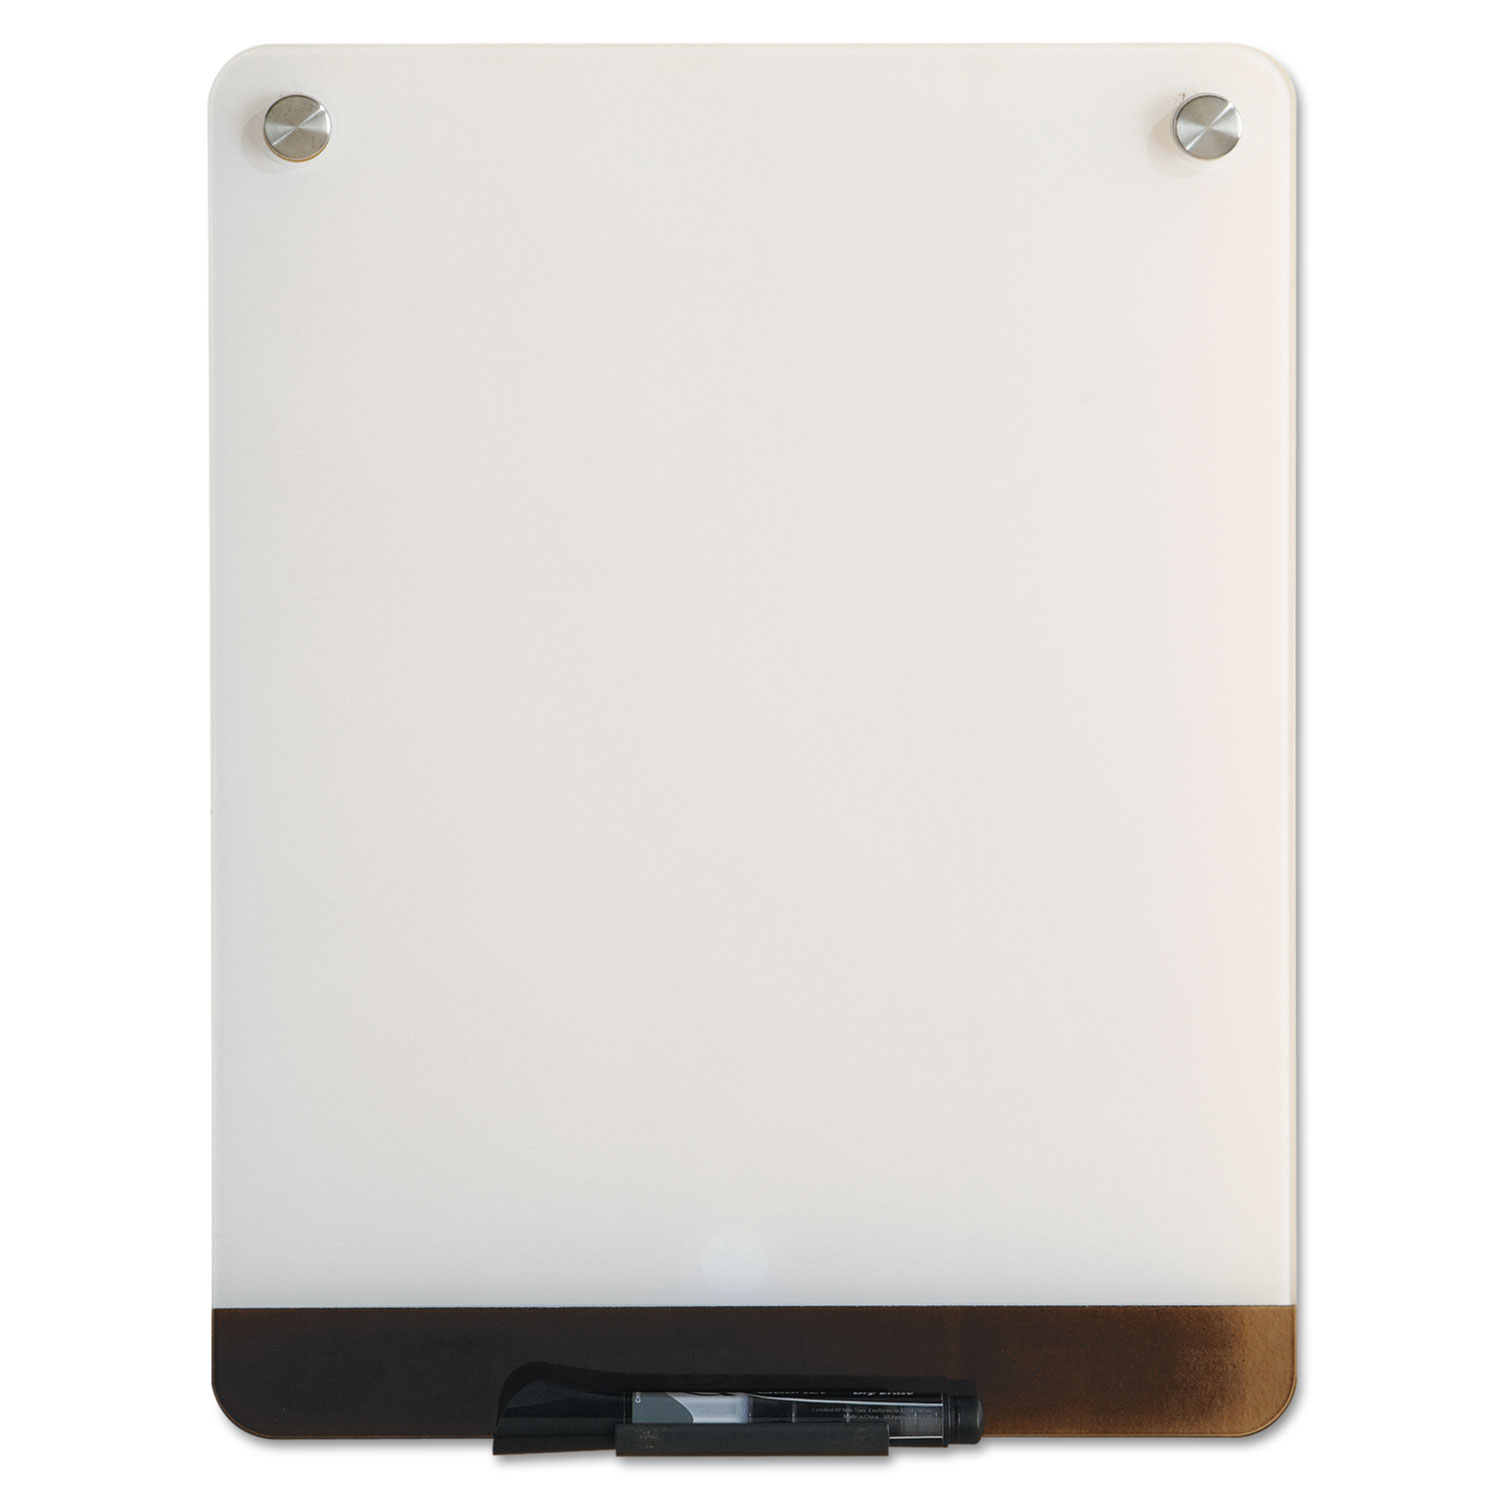  Iceberg 31120 Clarity Glass Personal Dry Erase Boards, Ultra-White Backing, 12 x 16 (ICE31120) 